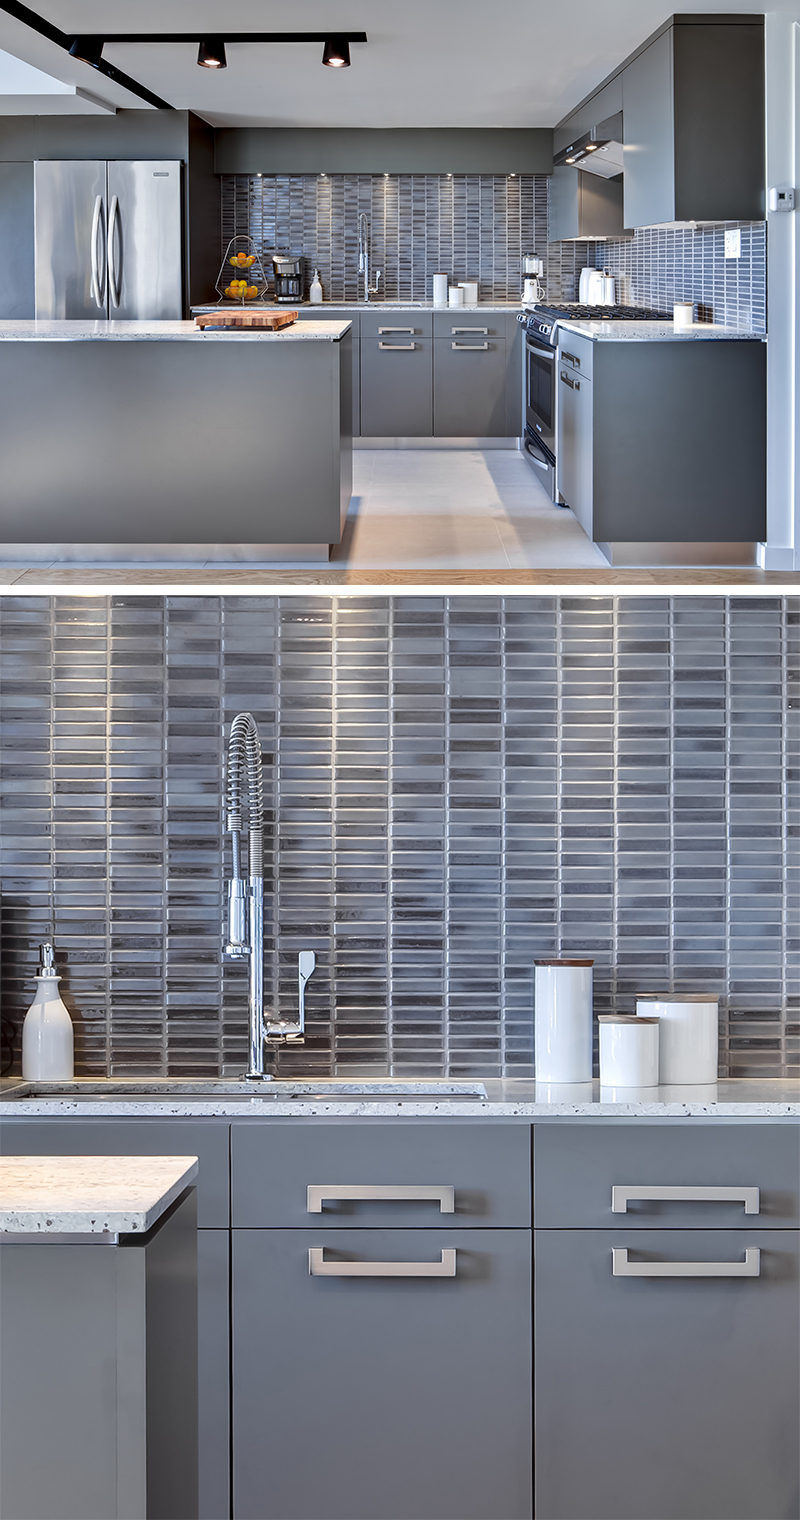 9 Inspirational Pictures Of Kitchens With Geometric Tiles // Rectangular tiles of varying shades of blue-grey compliment the colors used throughout this kitchen.